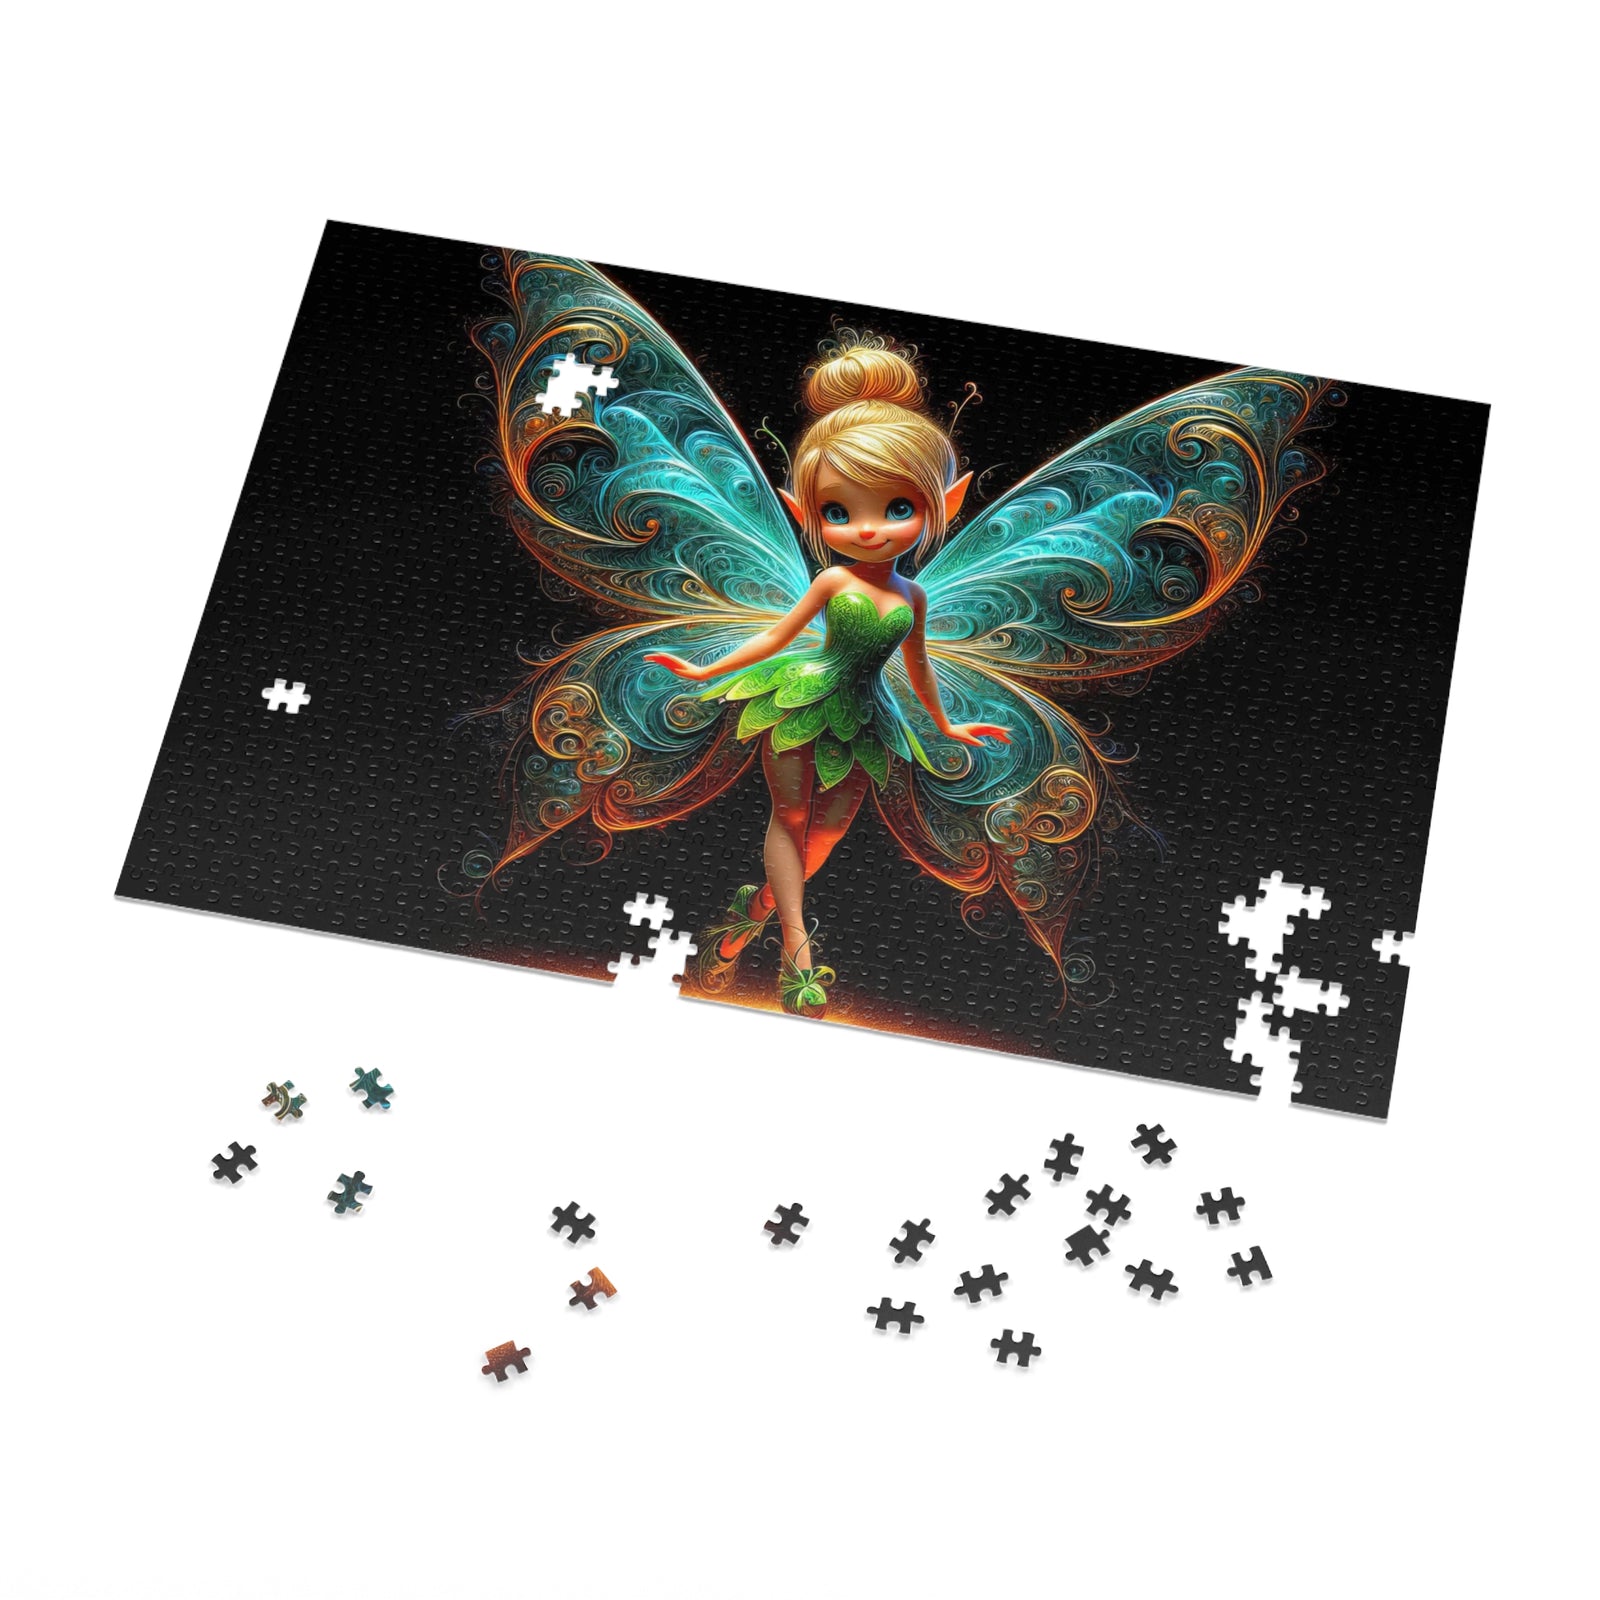 Glow of the Enchanted Eve Jigsaw Puzzle